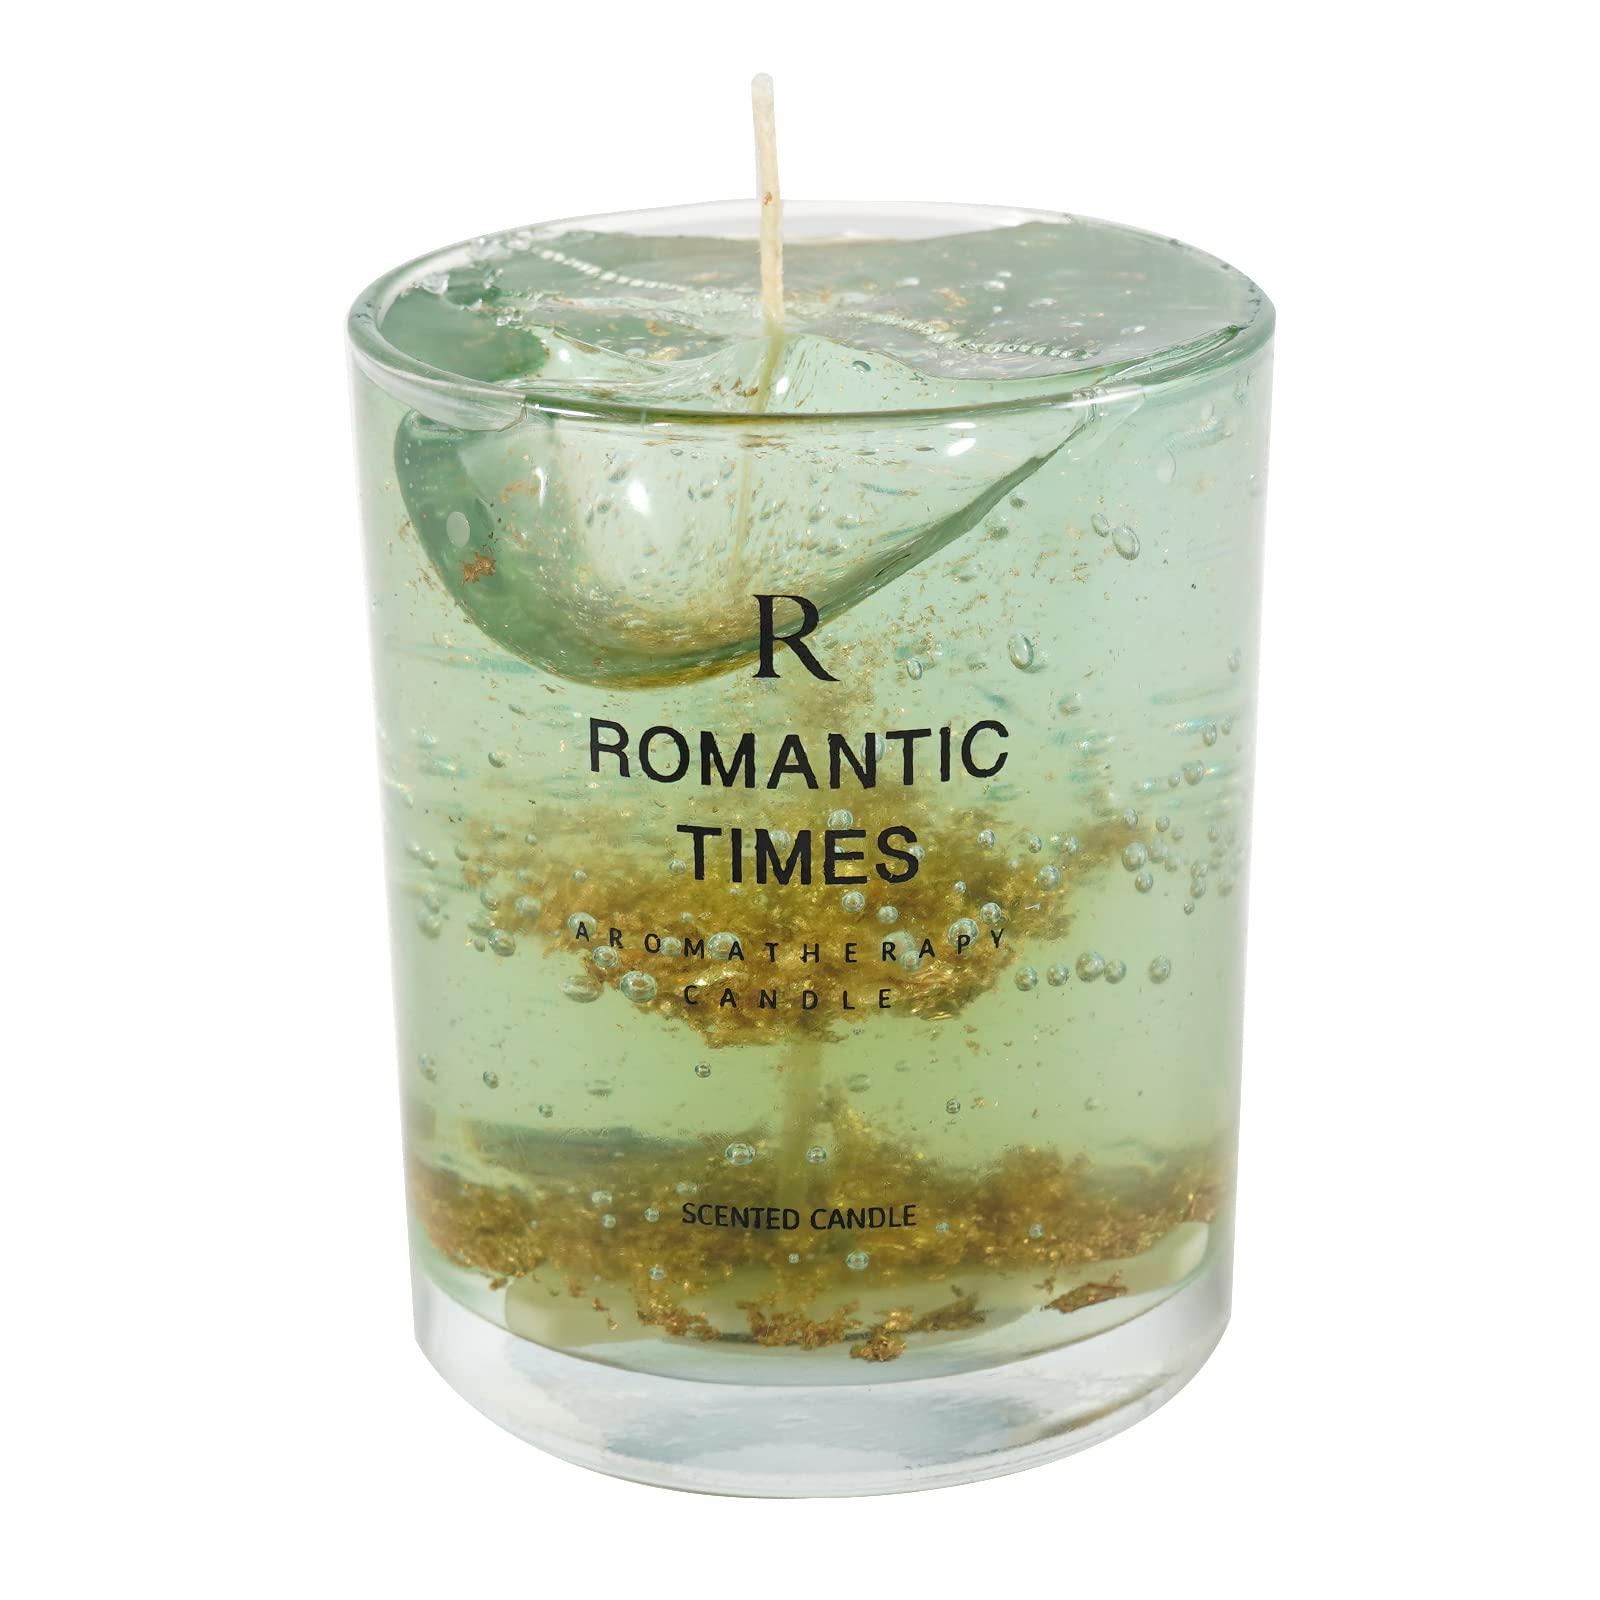 Soulnioi Glass Scented Candle Romantic Time Earl Tea and Cucumber Fruity for Relaxation Birthday Souvenir Home Decoration Gifts（7x8.5cm）